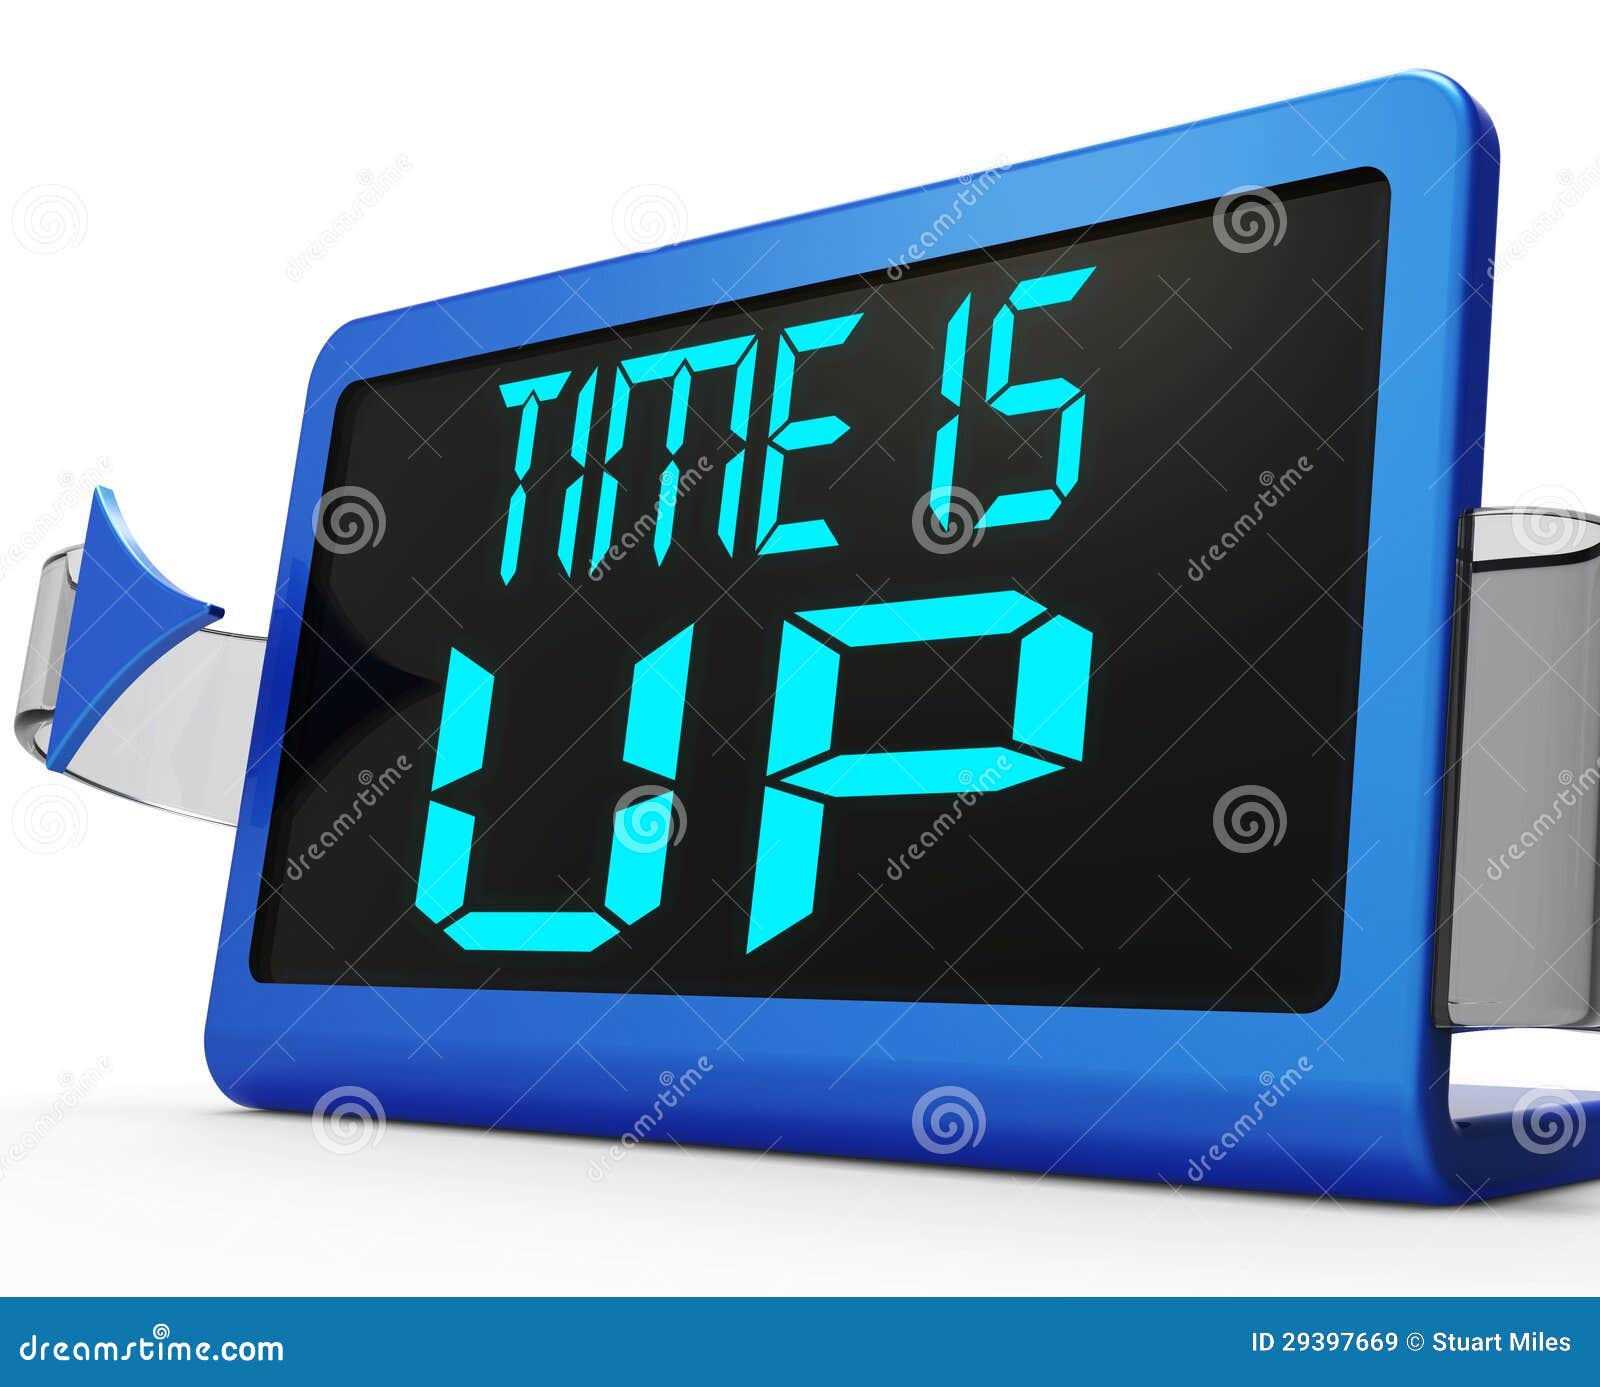 time is up message means deadline reached